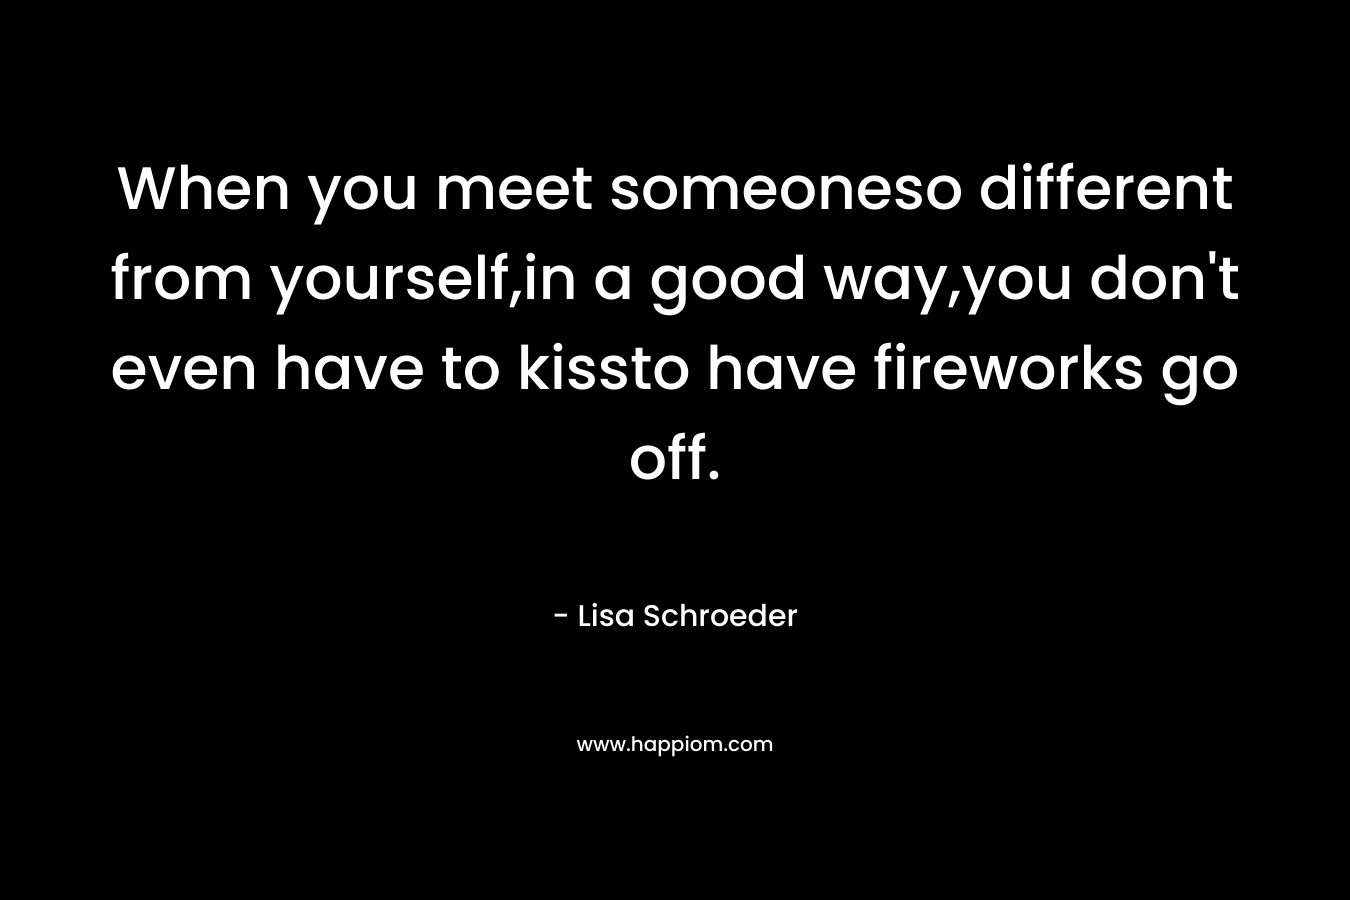 When you meet someoneso different from yourself,in a good way,you don't even have to kissto have fireworks go off.